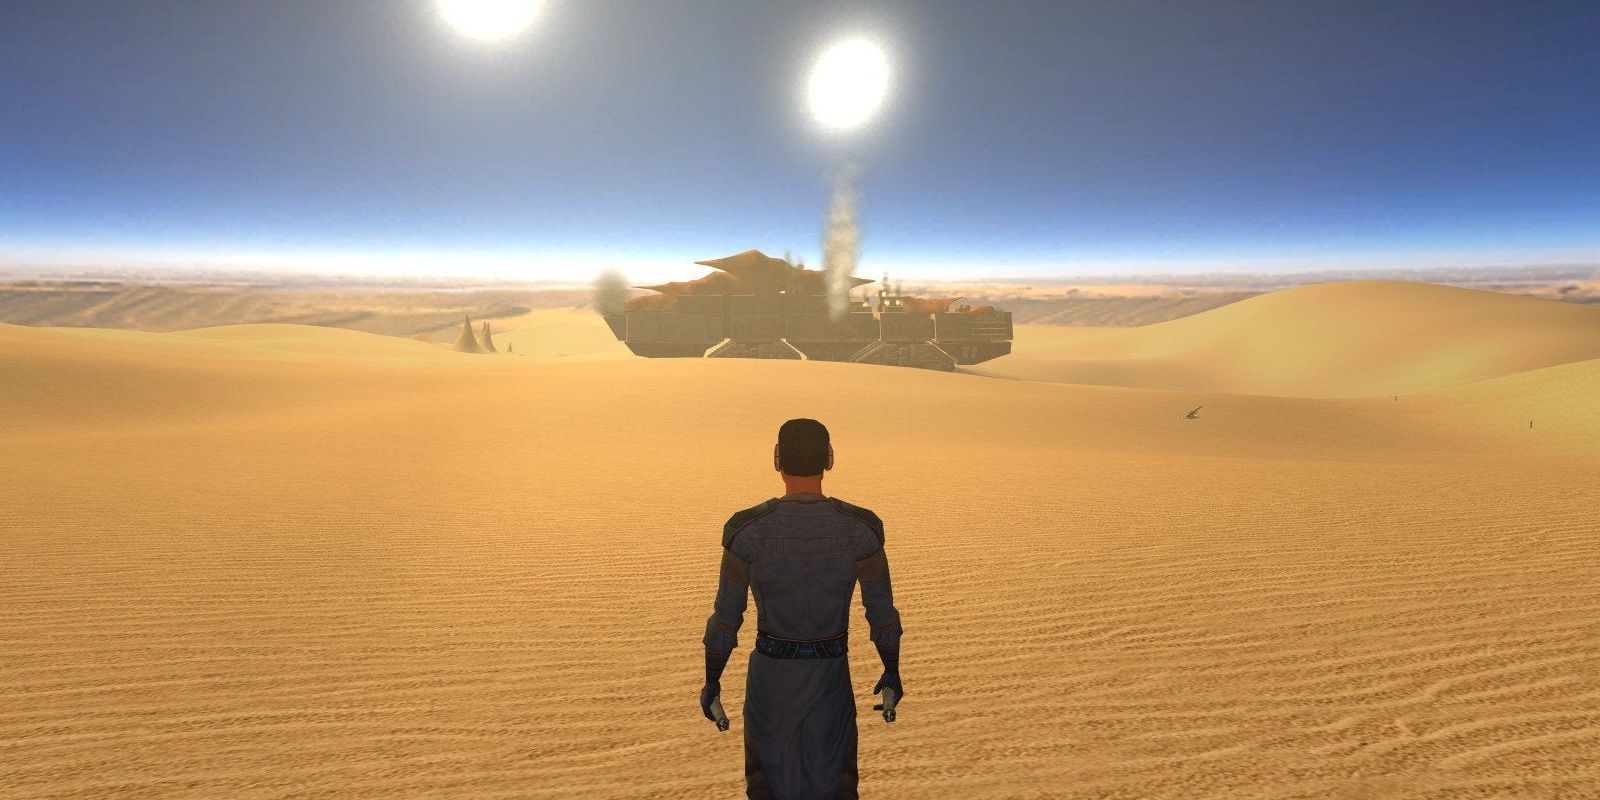 The Main Character from Star Wars KOTOR looks out at Tatooine